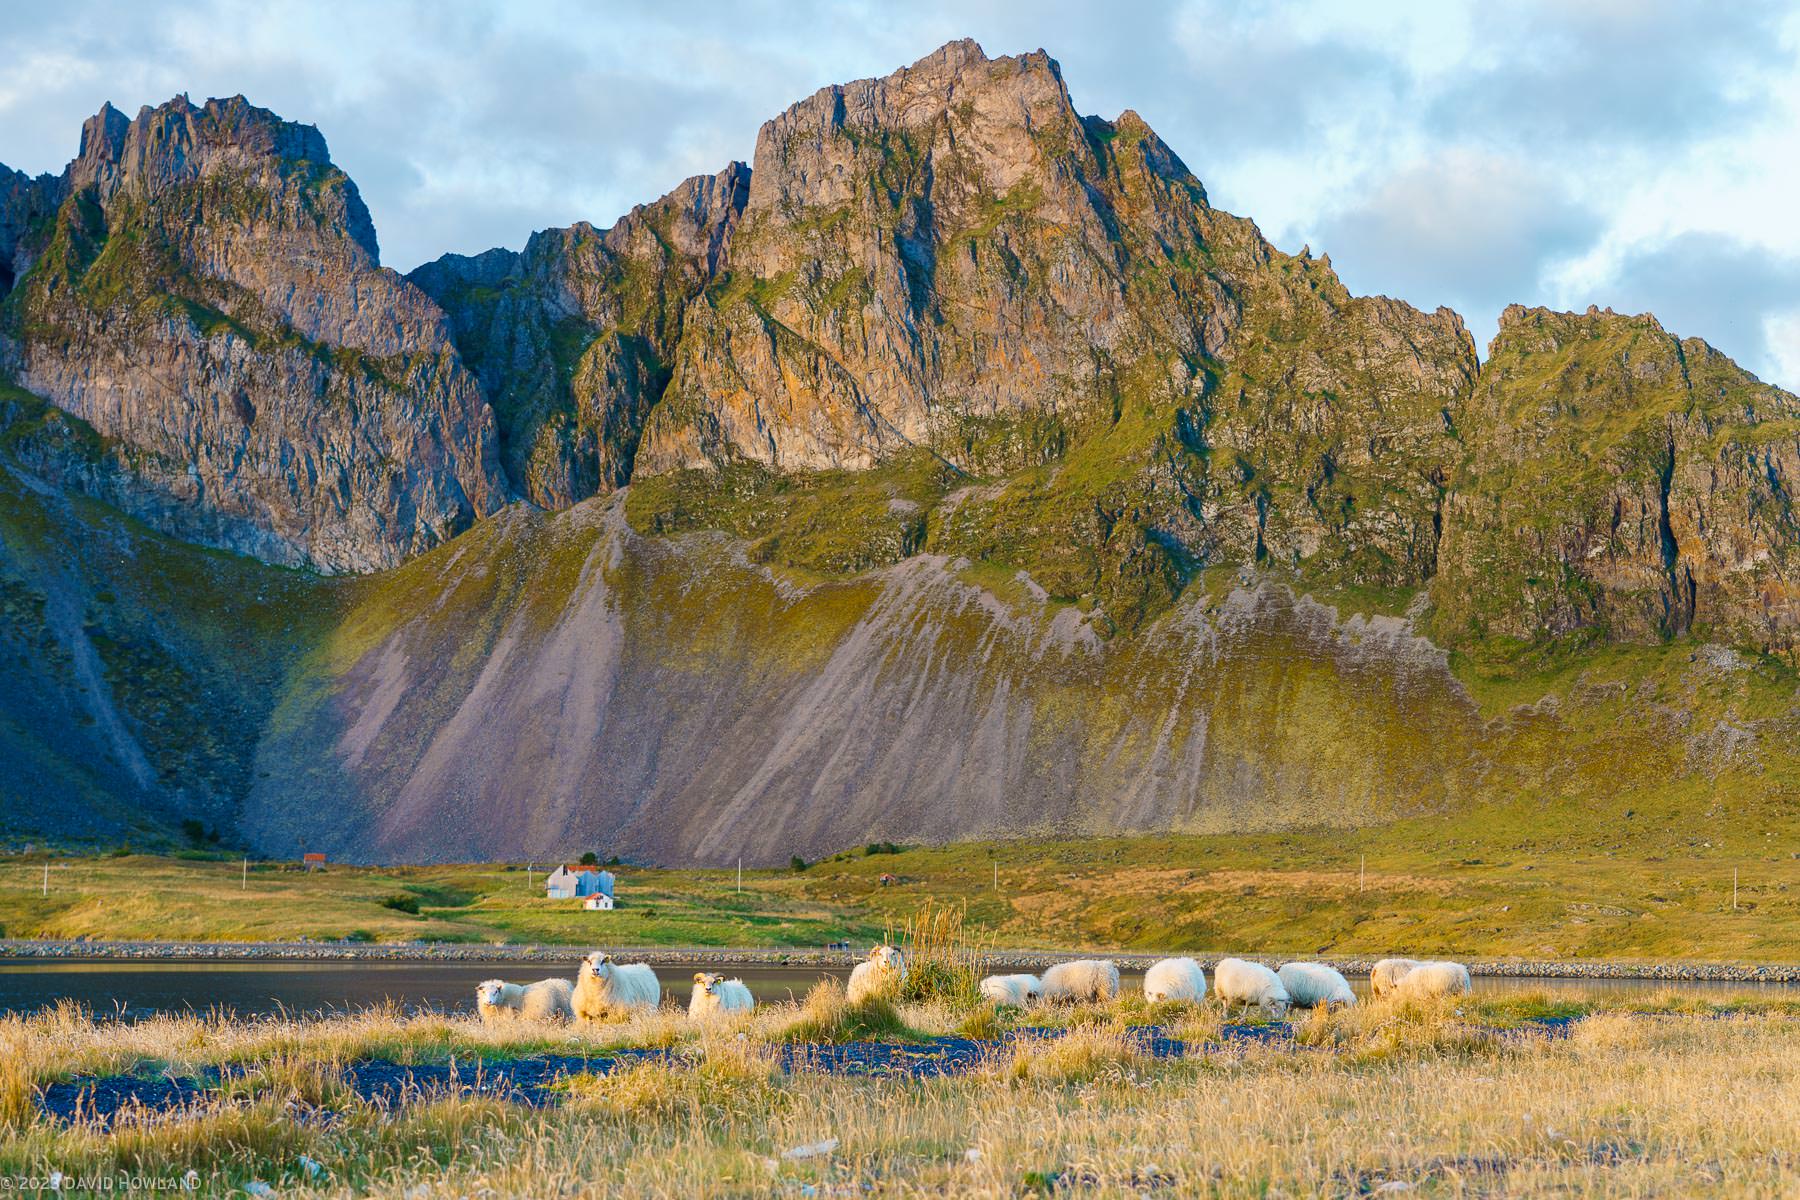 A photo of a flock of sheep grazing on a black sand beach in front of a towering mountain range in Iceland